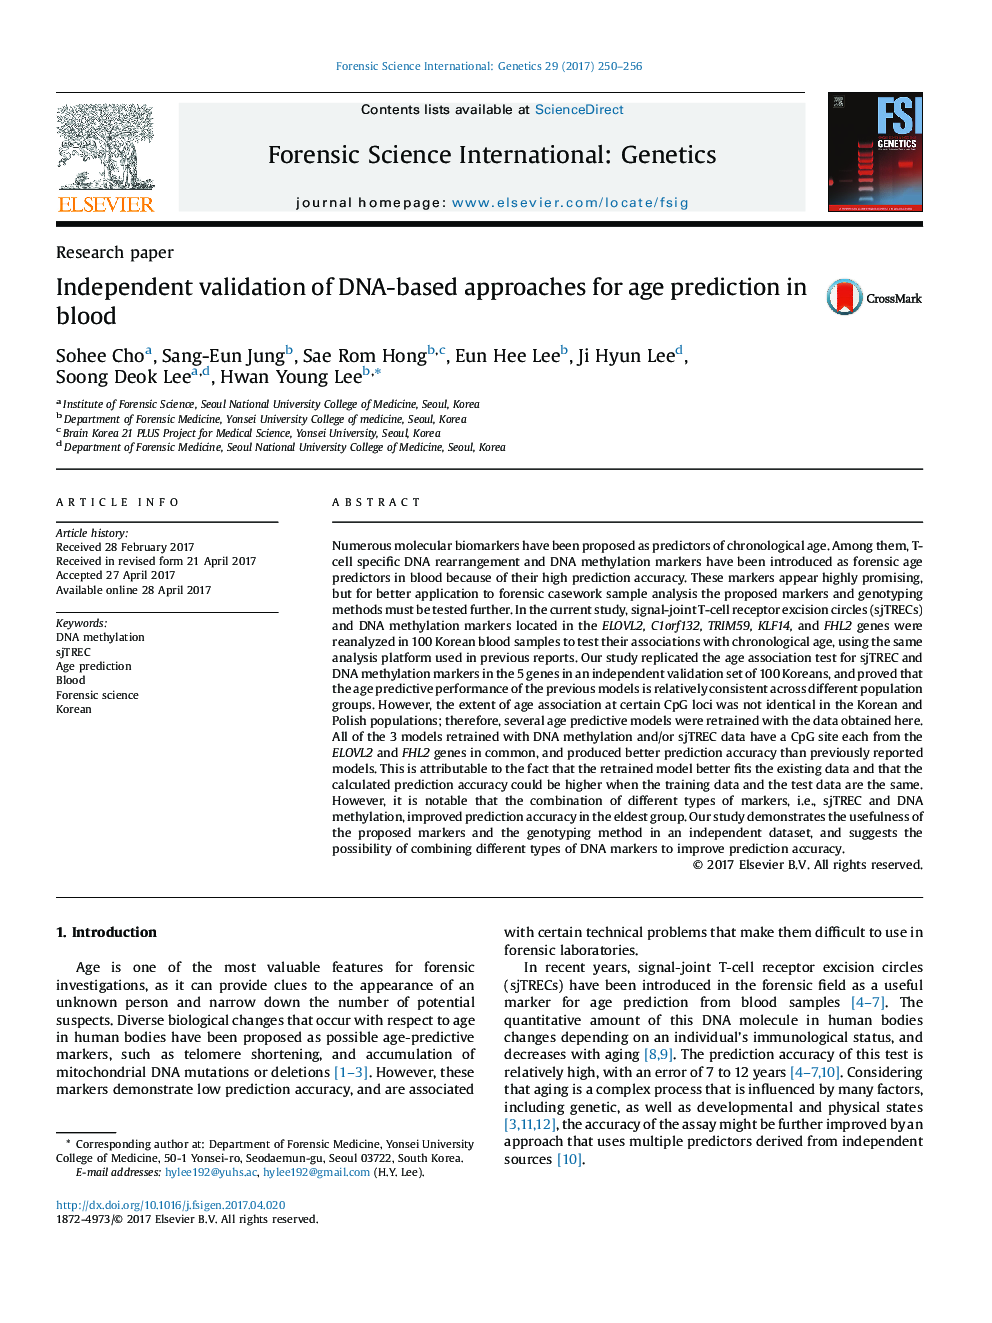 Independent validation of DNA-based approaches for age prediction in blood